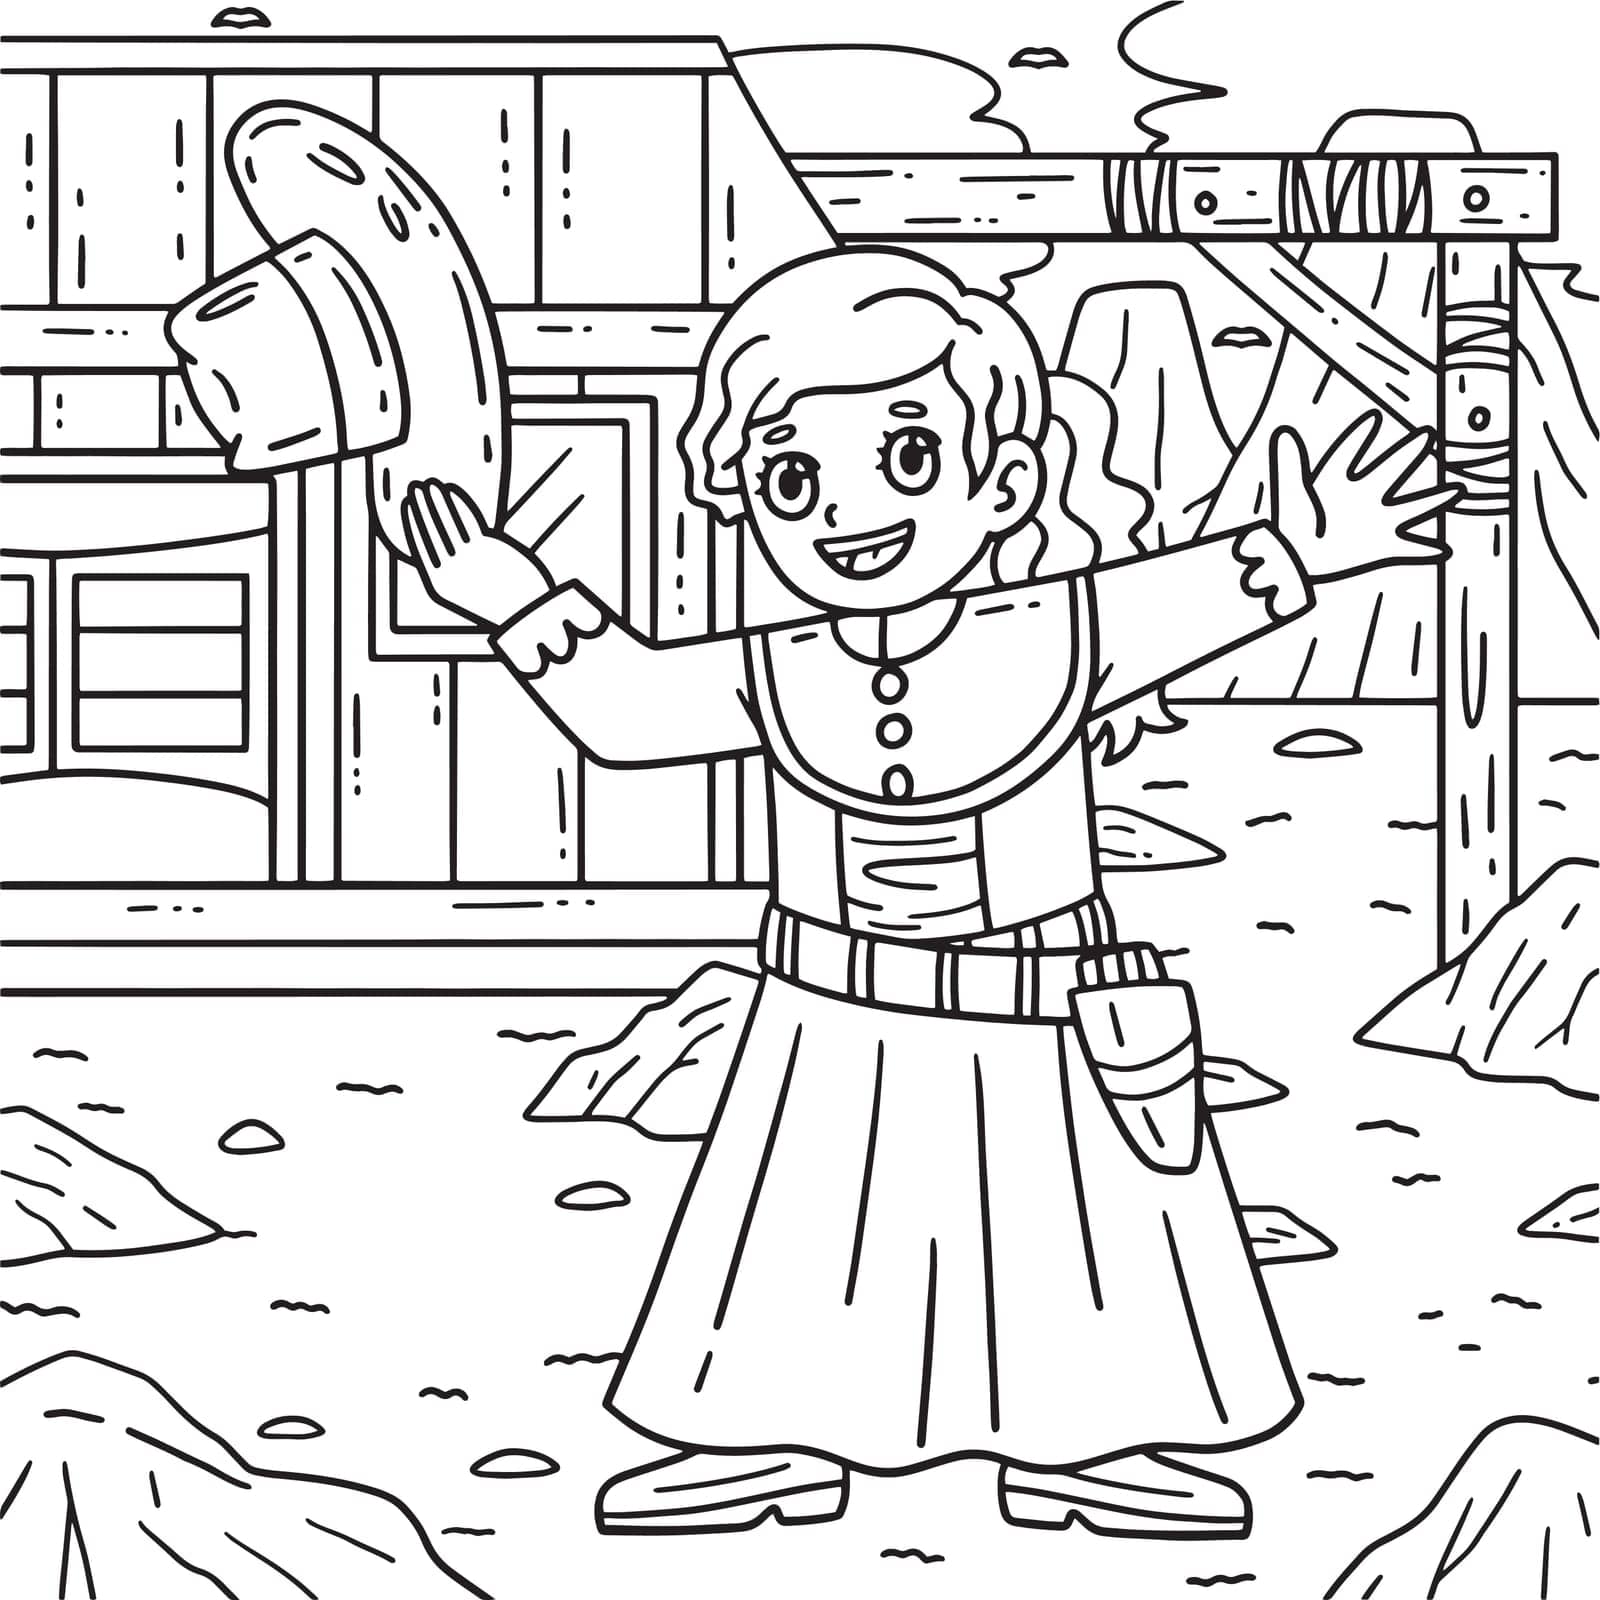 A cute and funny coloring page of a Cowgirl in a Dress. Provides hours of coloring fun for children. To color, this page is very easy. Suitable for little kids and toddlers.